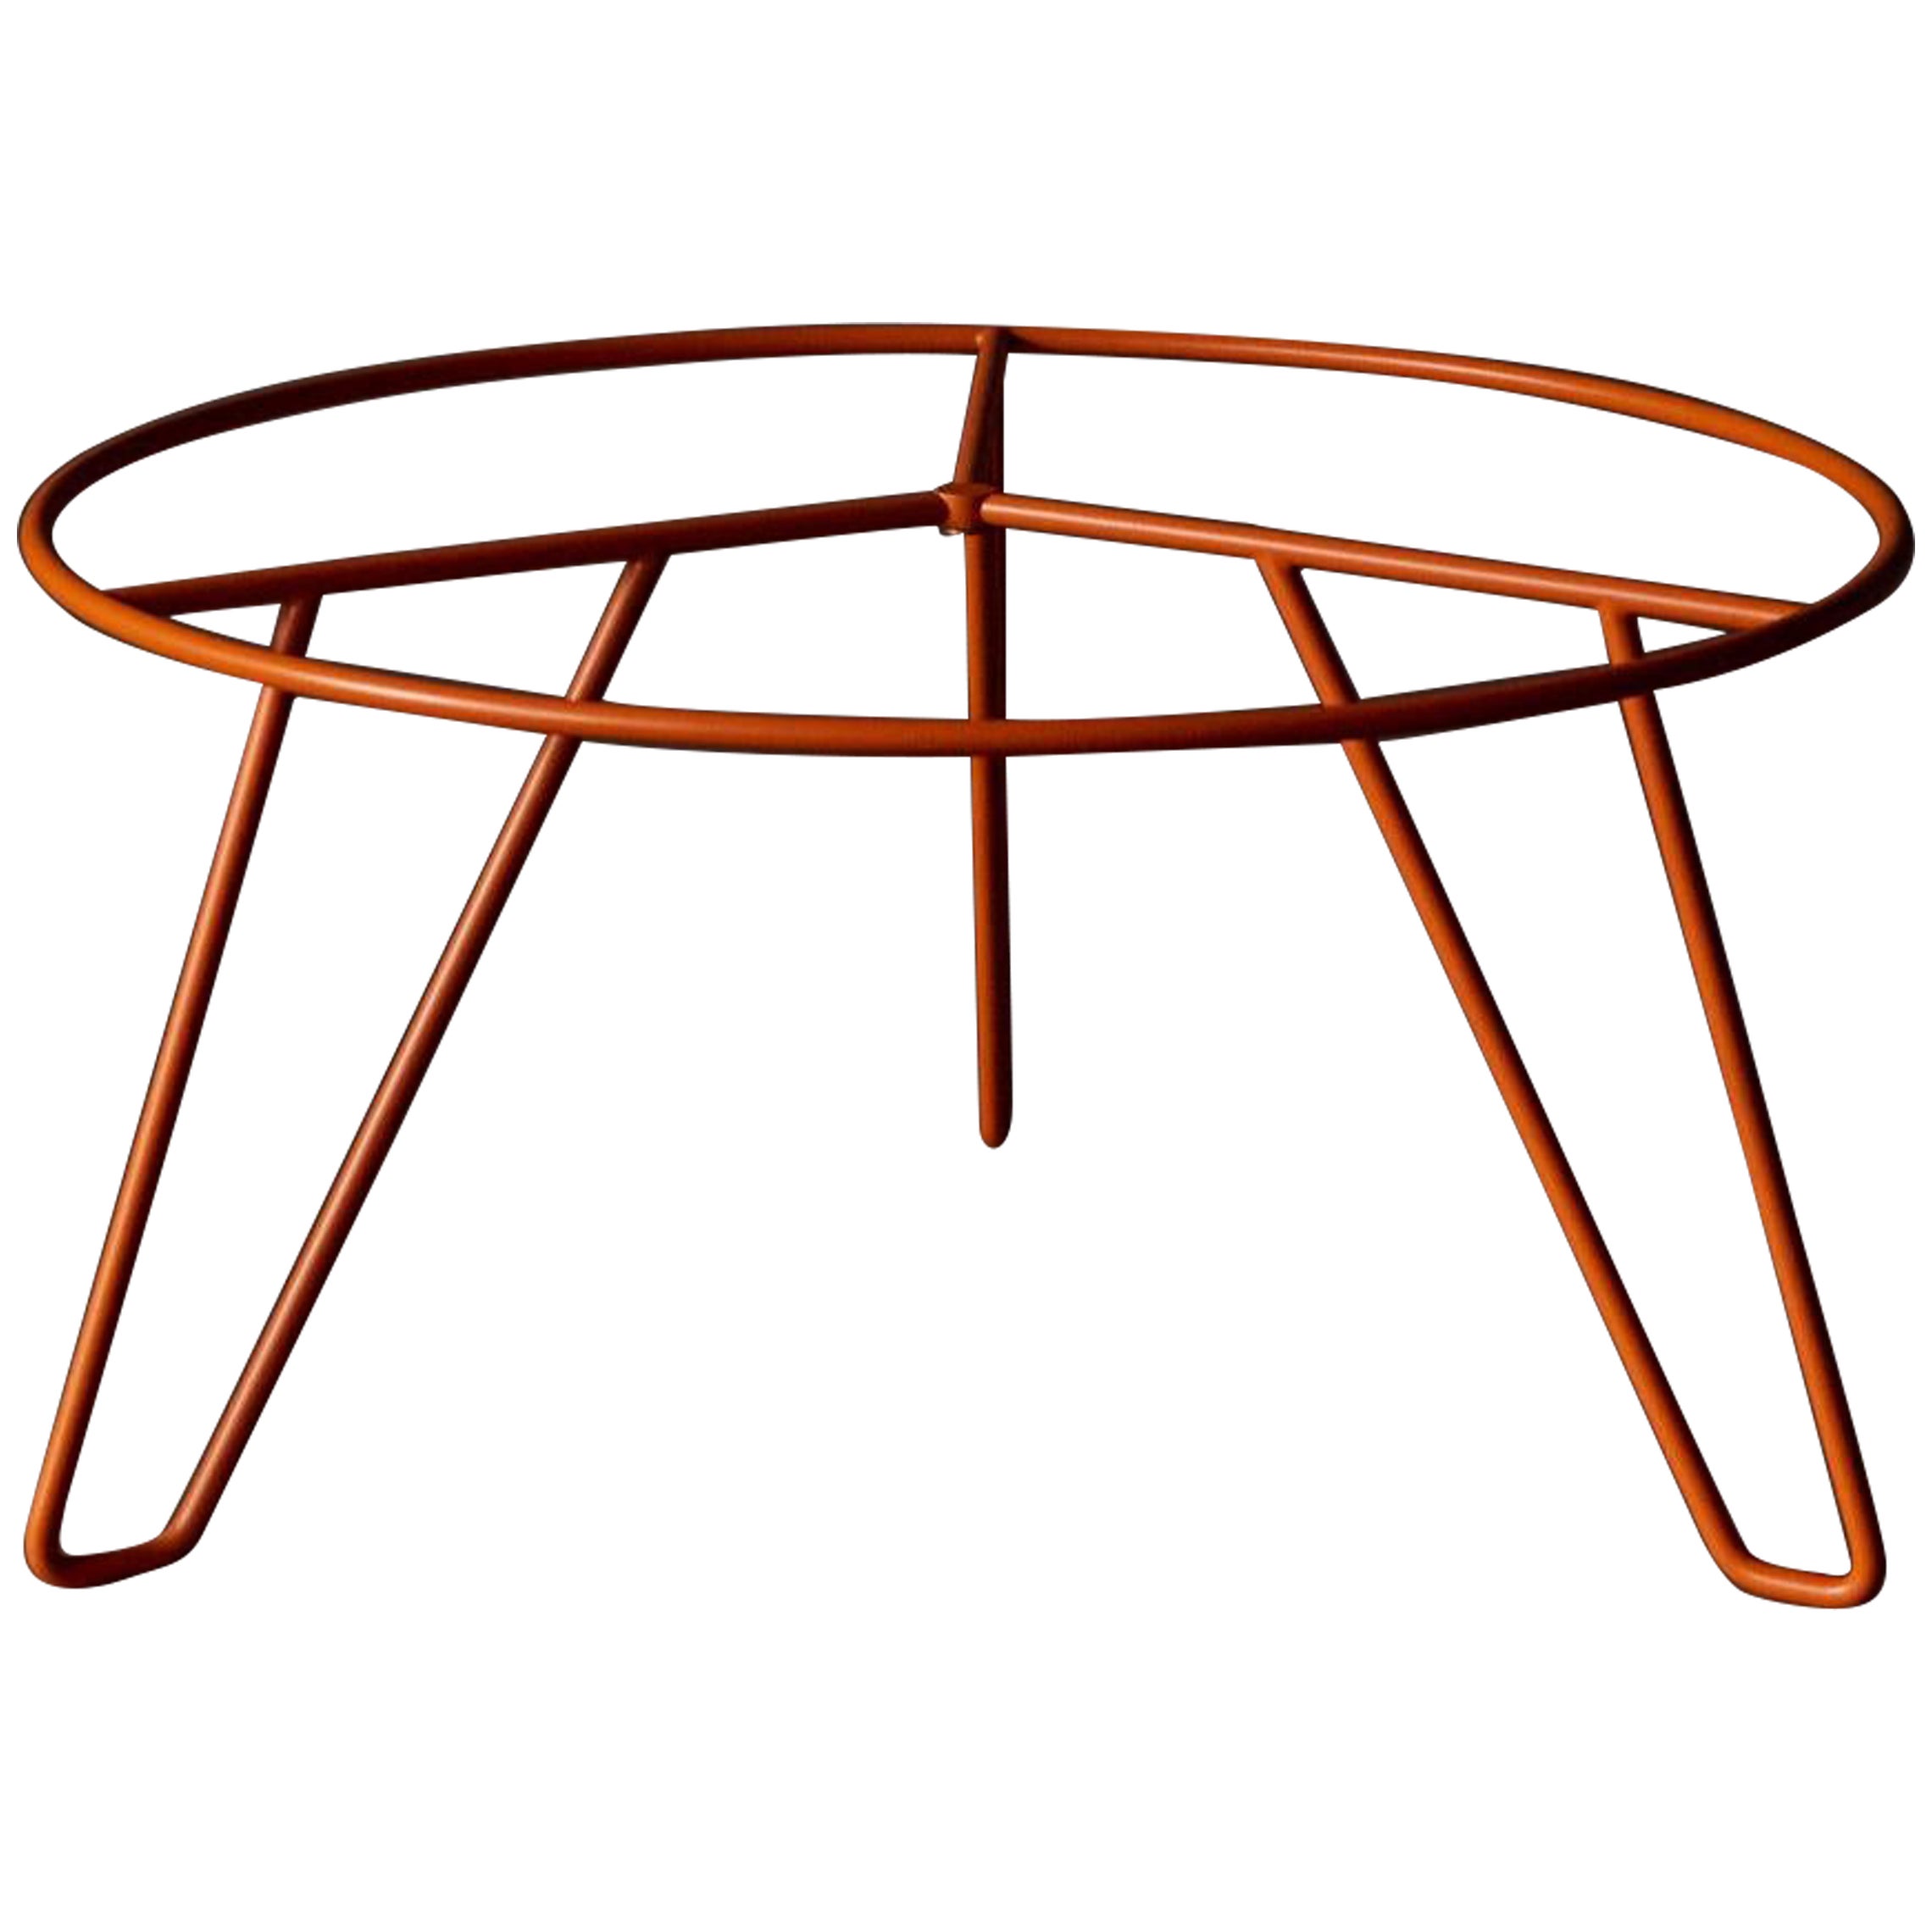 Manresa Table by Gary Snyder, USA